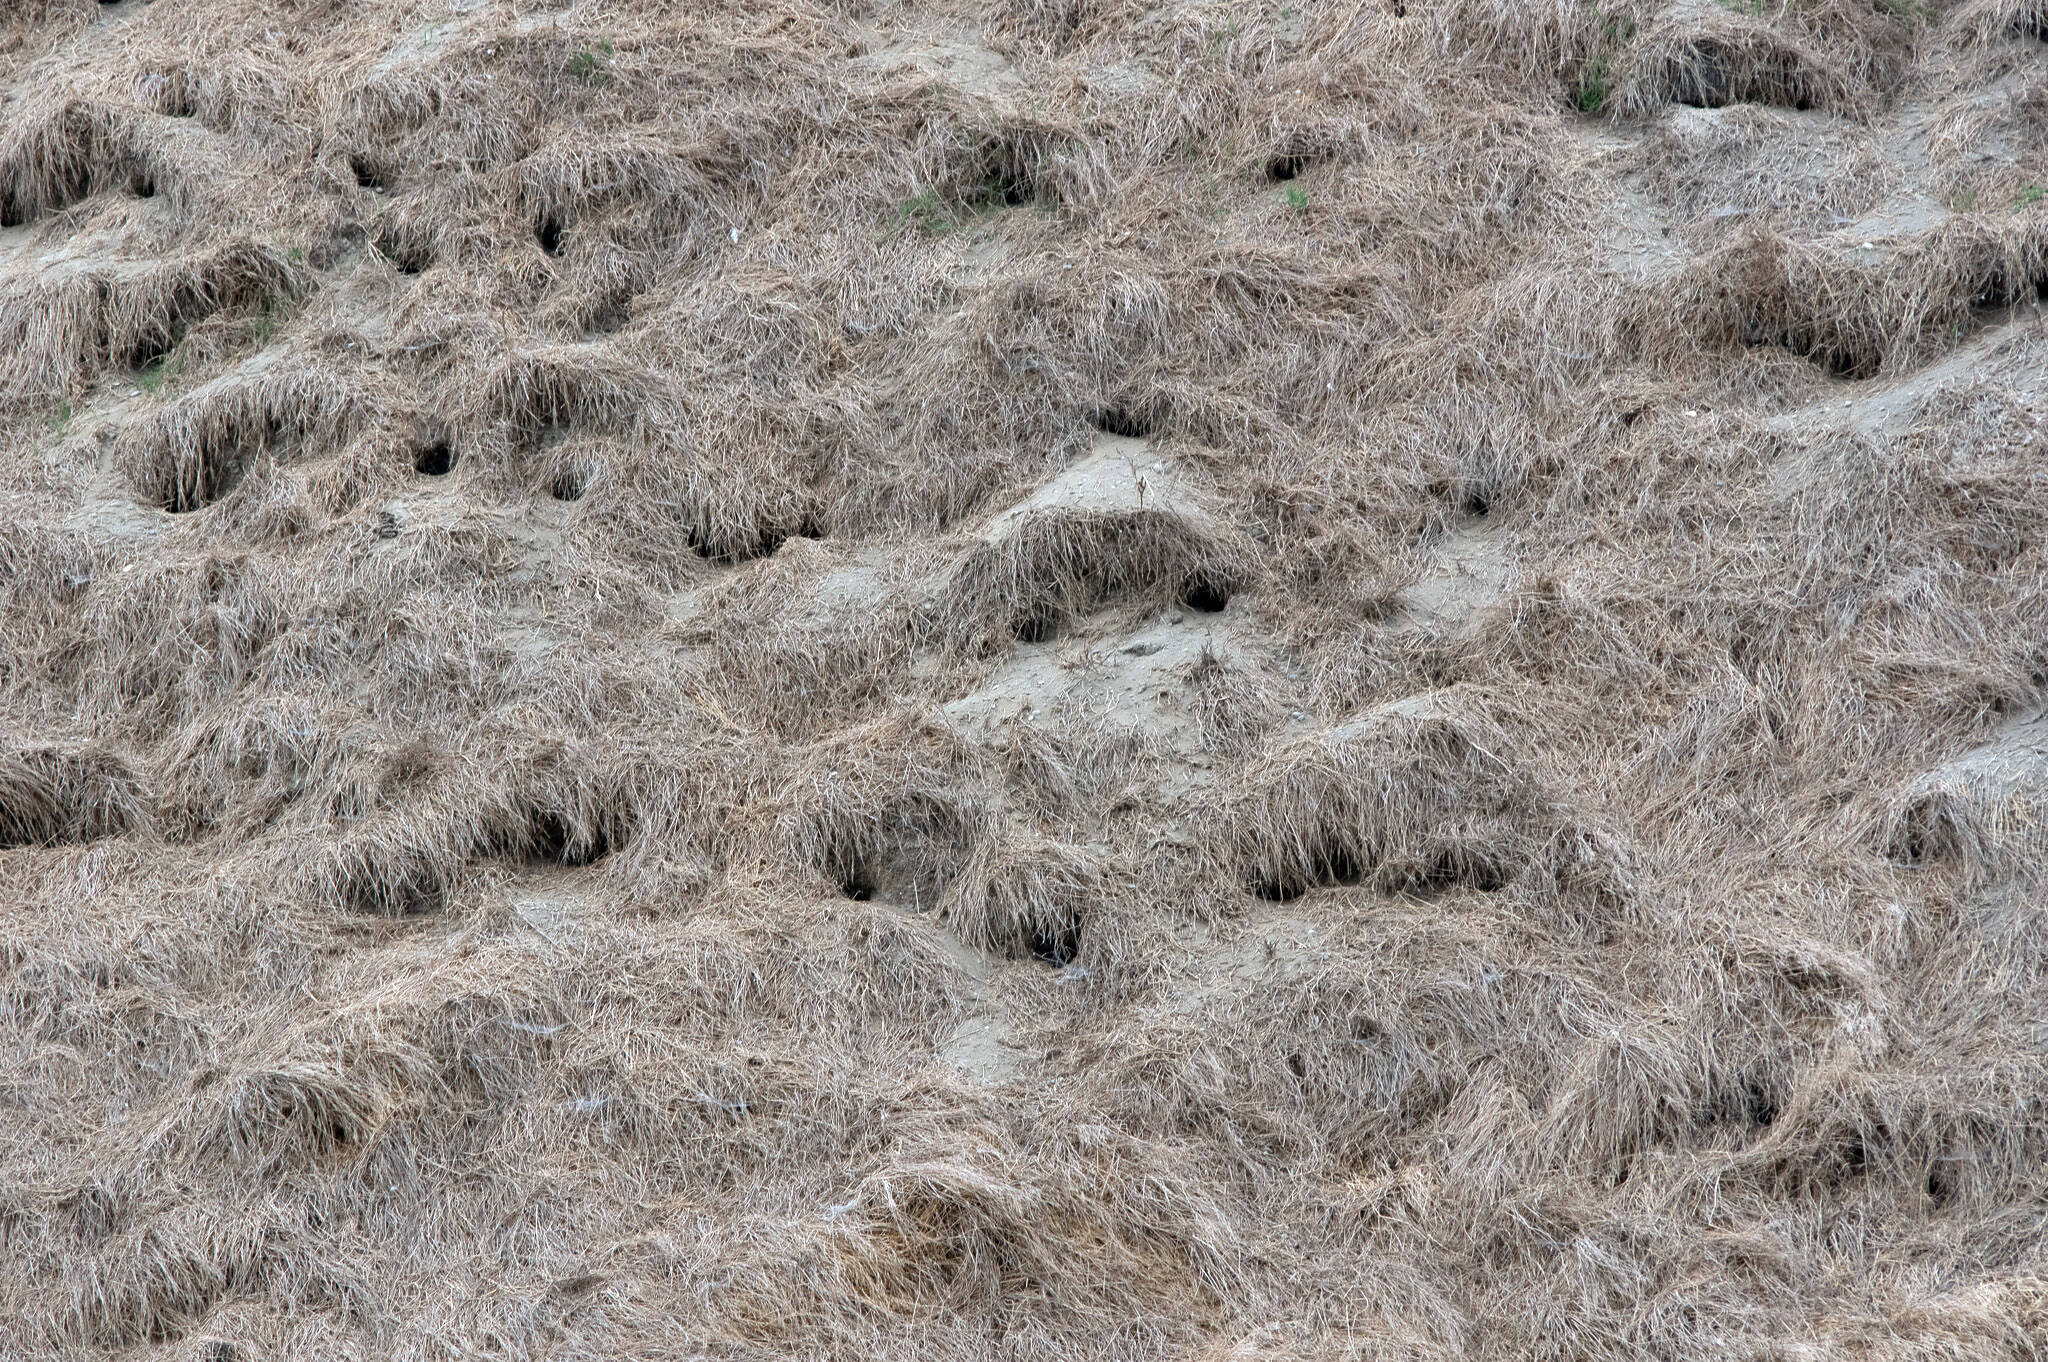 A small segment of one of the grassy cliffs of Protection Island shows more than 40 entrances to rhinoceros auklet nesting burrows. Deep within they will raise their babies in a room off a maze of tunnels. An ecosystem exists within the tunnels as well. Pearson said that no one has done a formal study on the beetles and spiders and other denizens of the auklet’s seasonal homes.